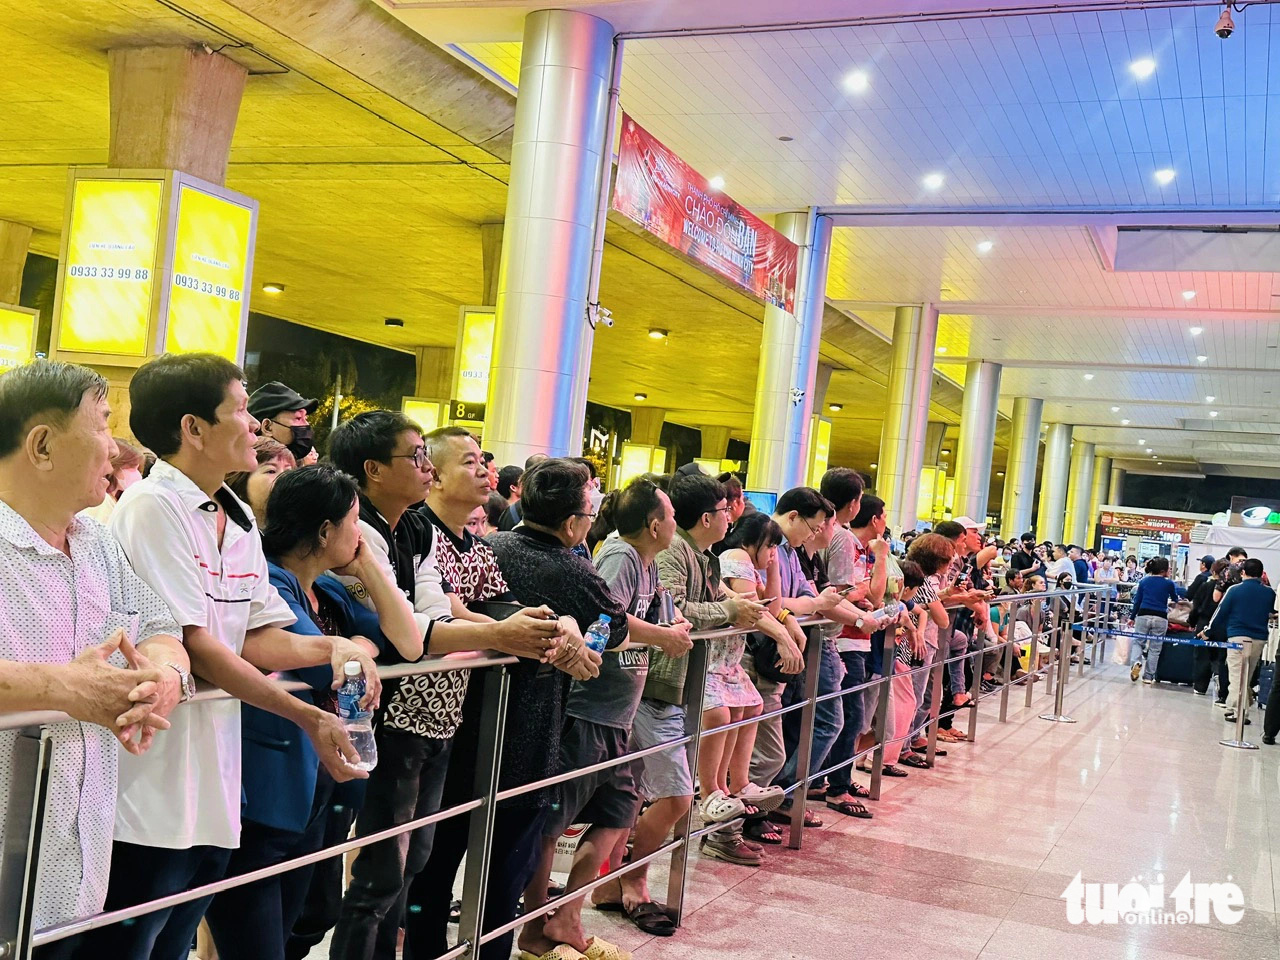 A crowd of people wait for their overseas Vietnamese relatives at the arrival hall of the international terminal at Tan Son Nhat International Airport in Ho Chi Minh City, January 24, 2024. Photo: Cong Trung / Tuoi Tre